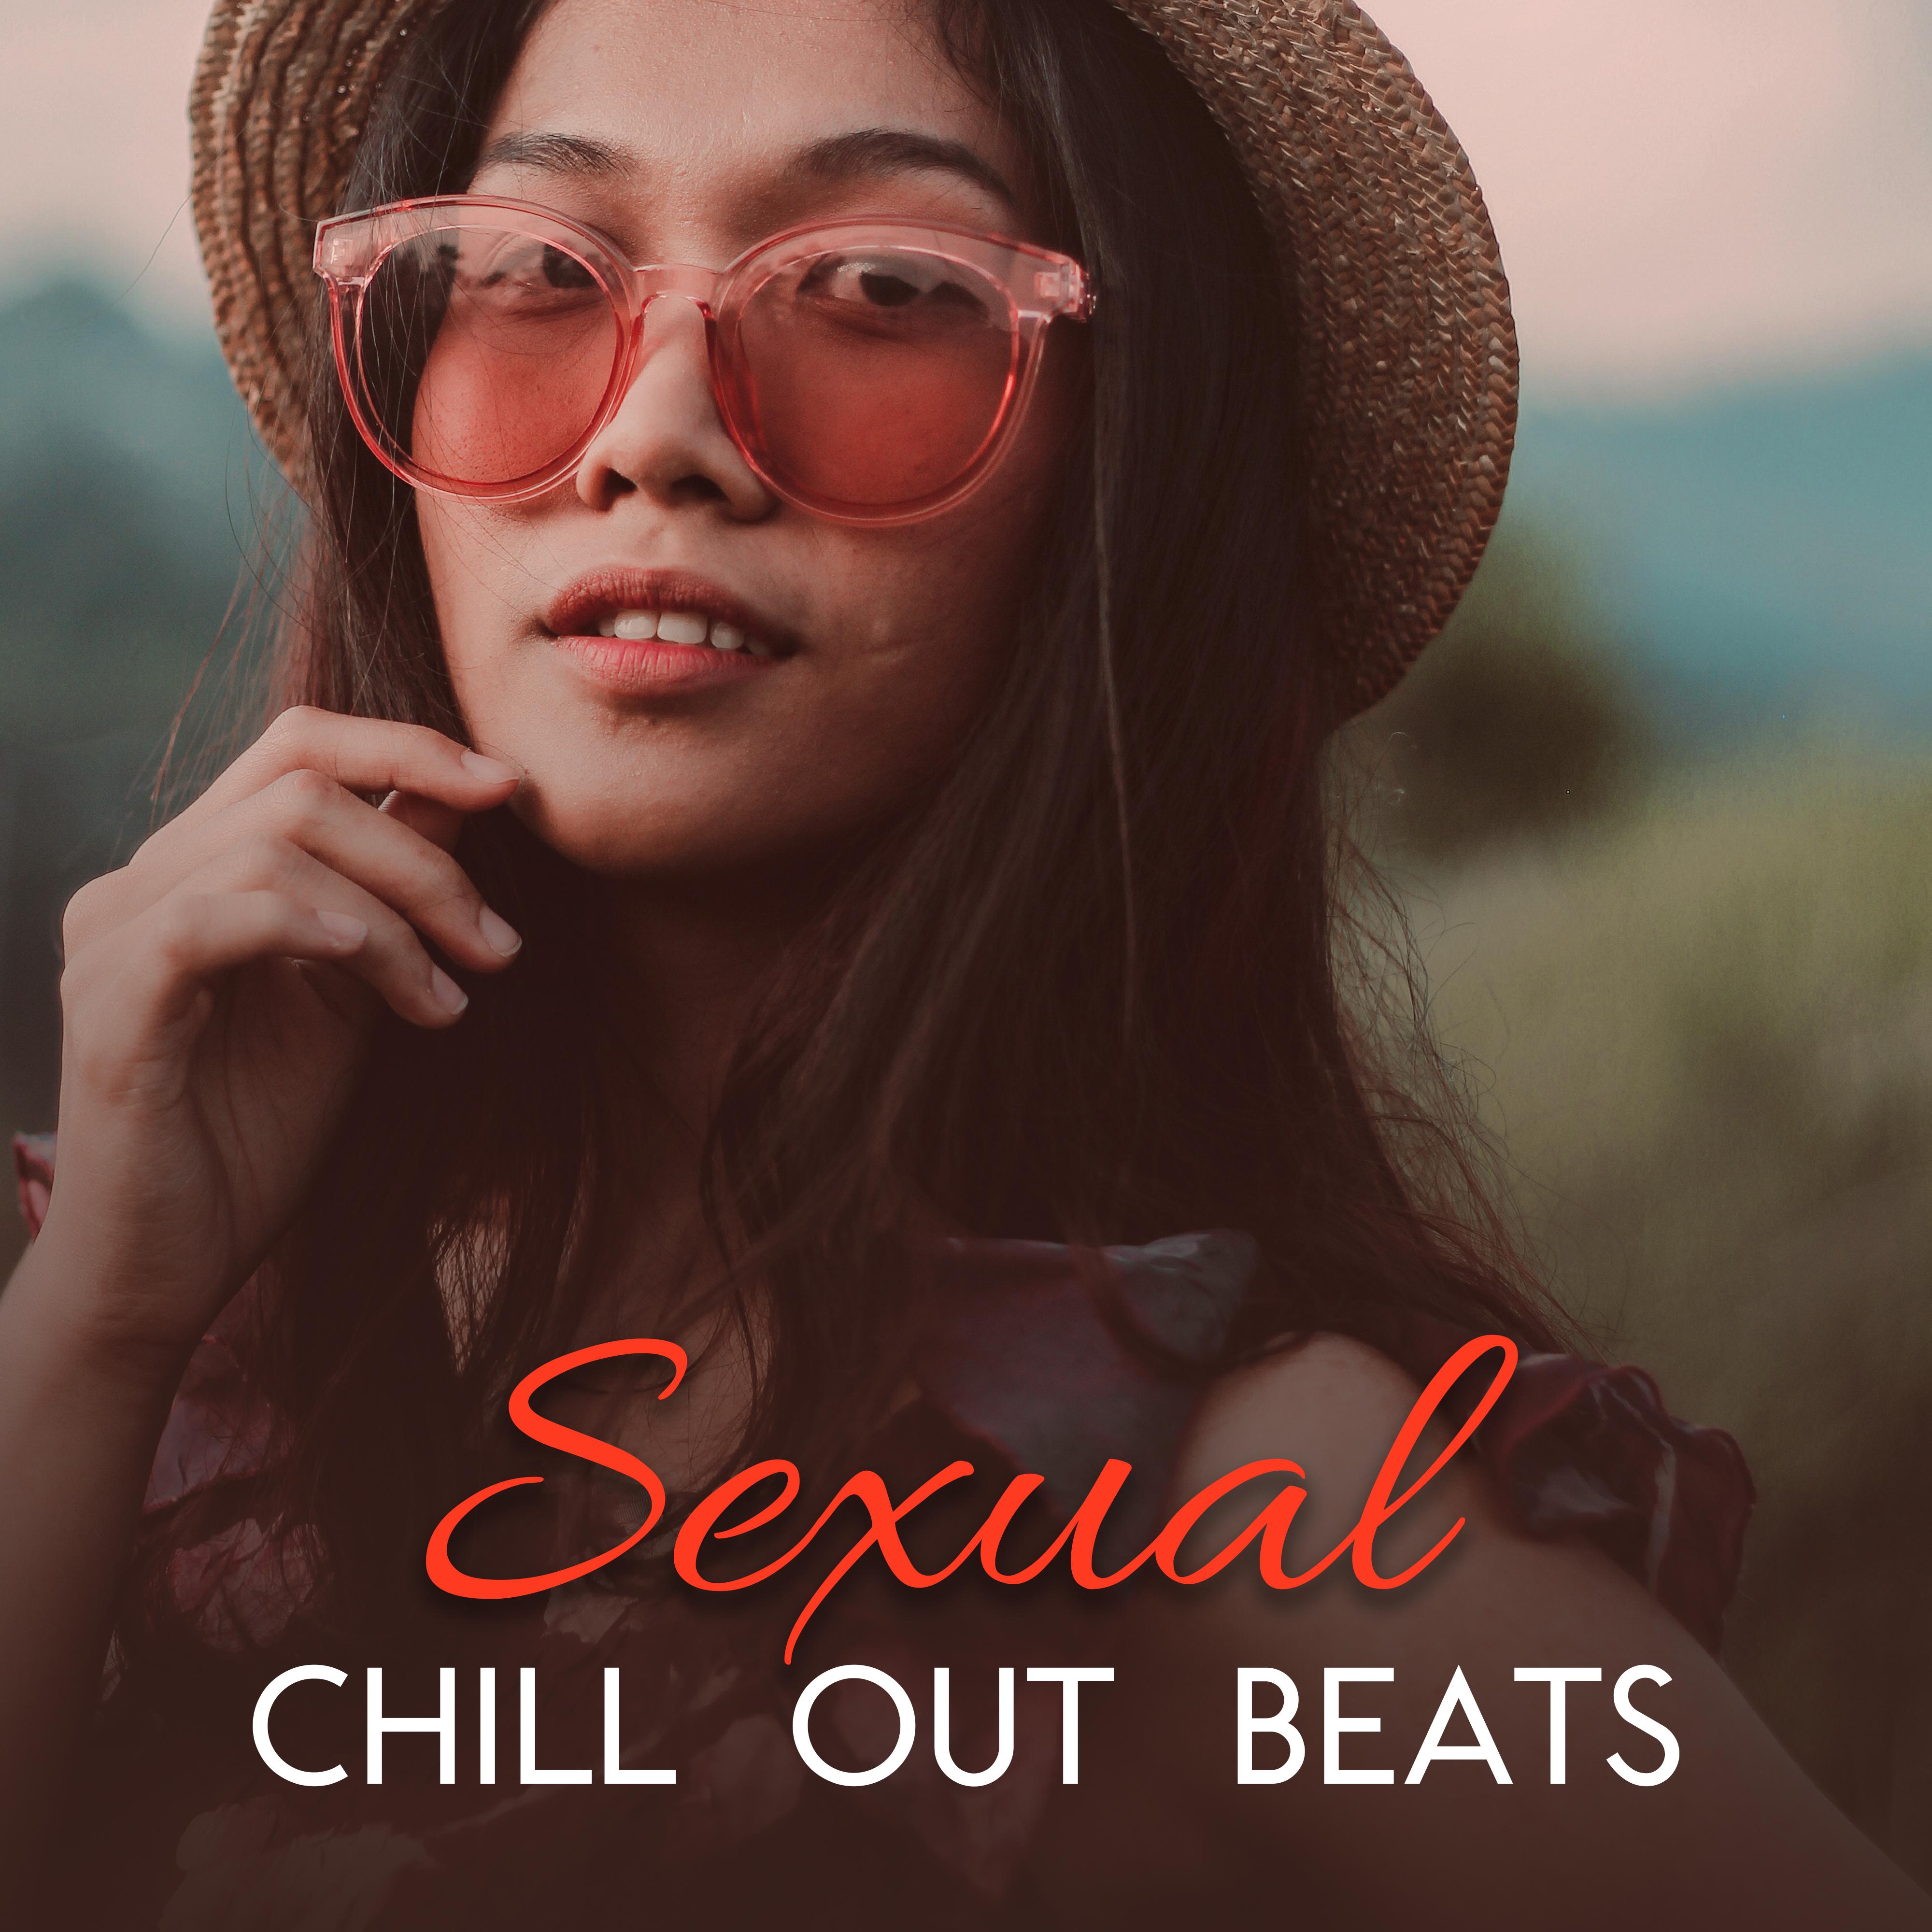 ****** Chill Out Beats